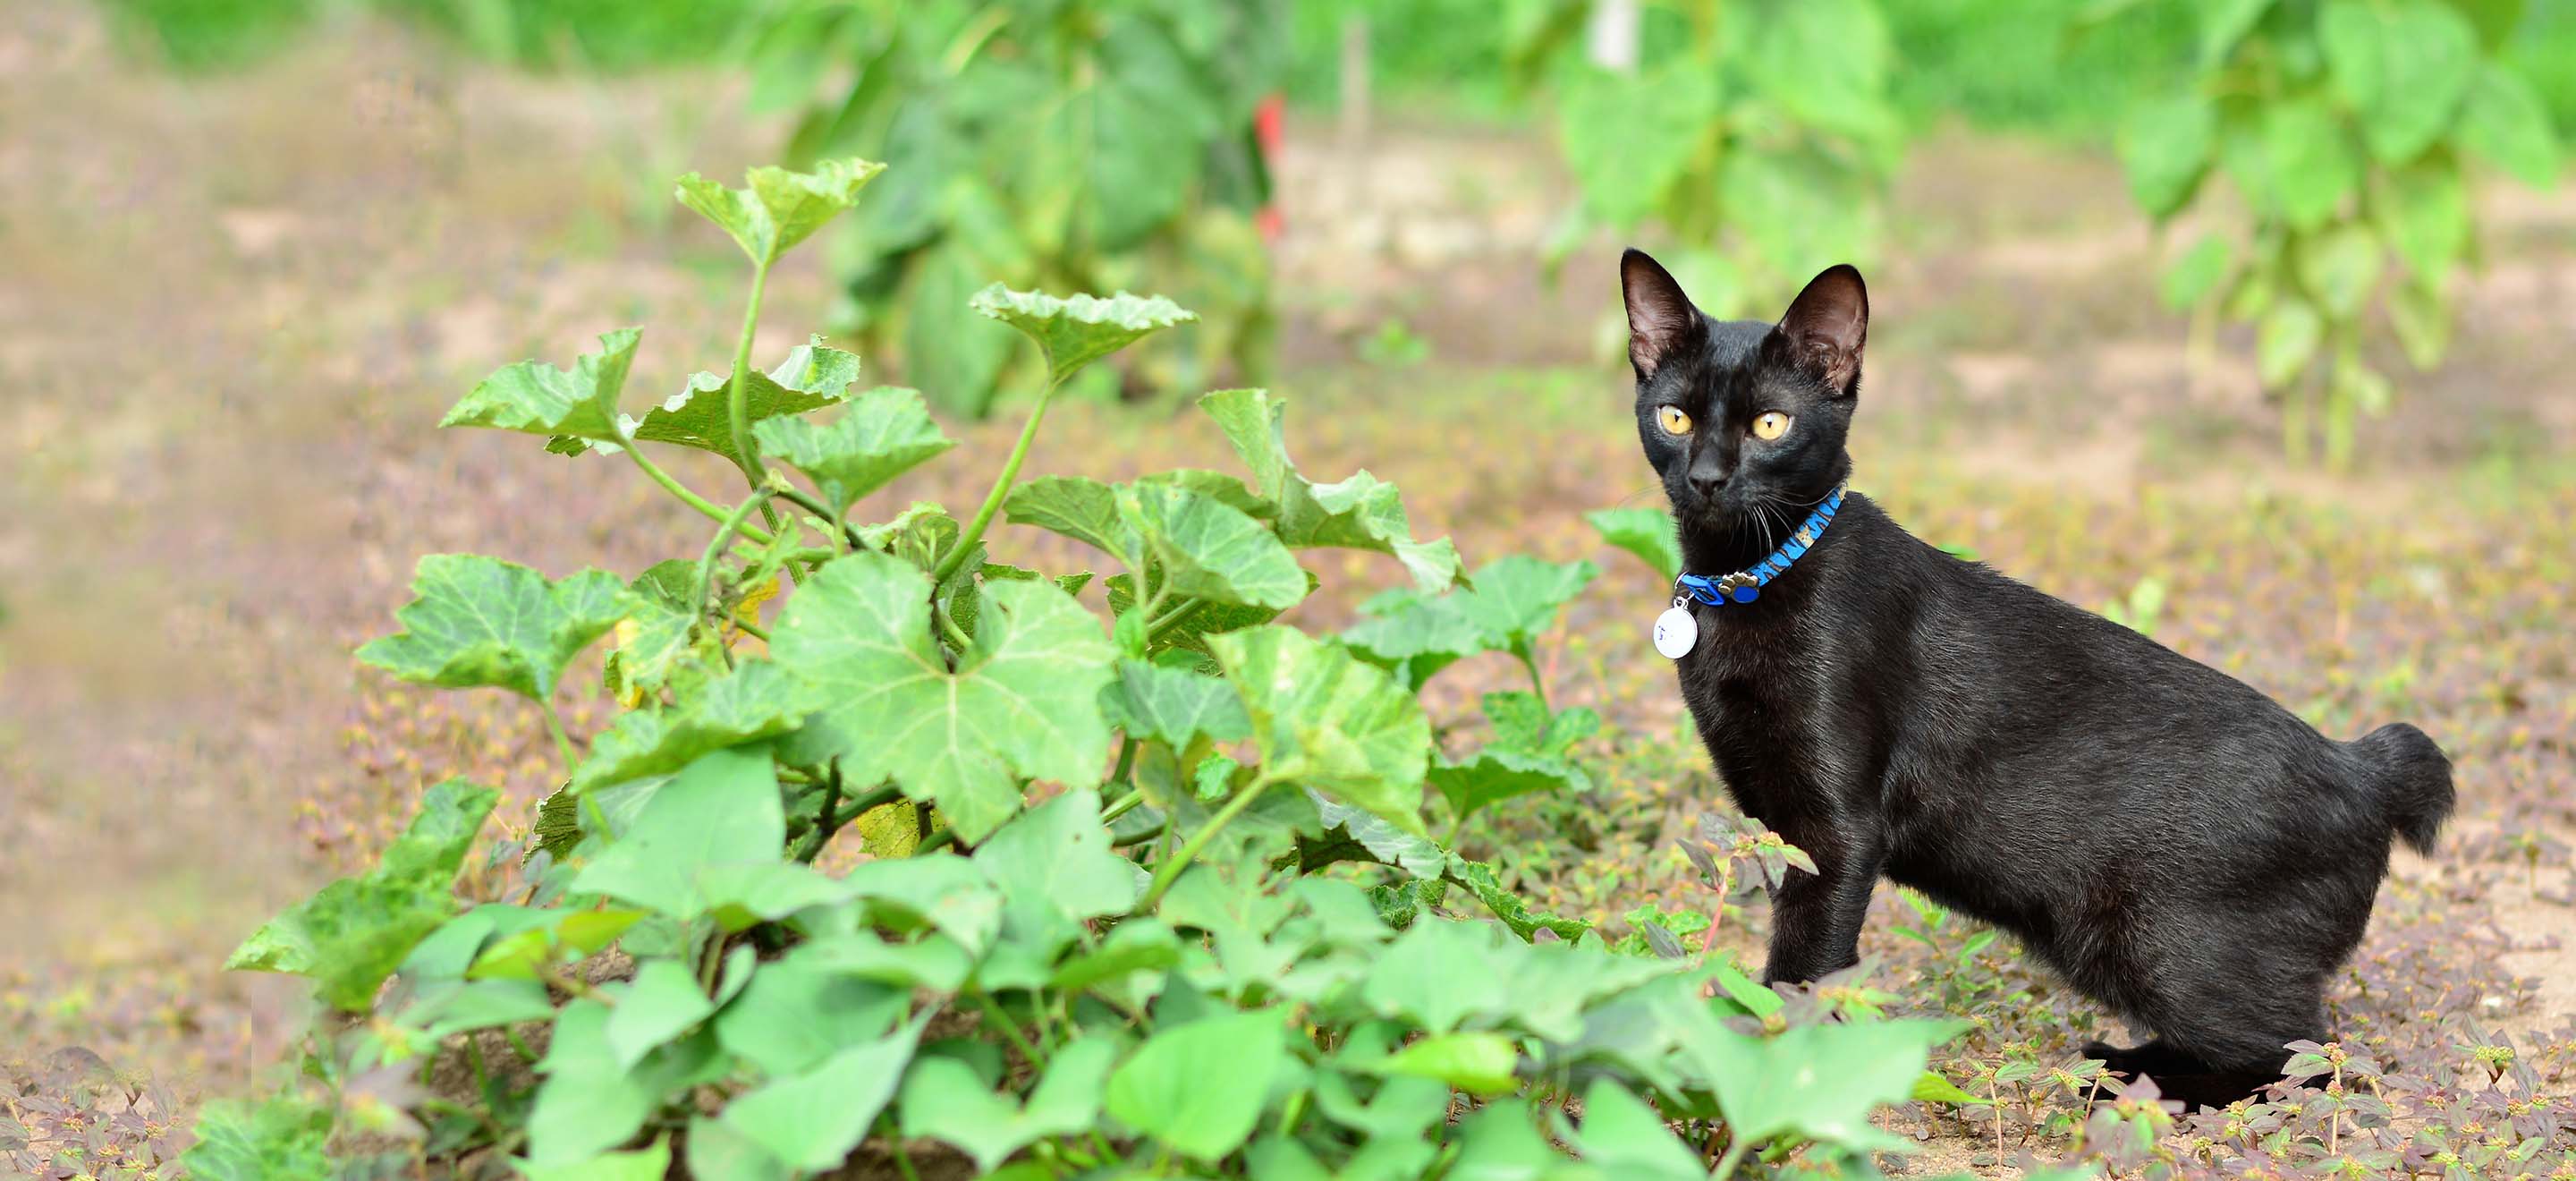 Black Japanese Bobtail cat with a collar standing next to a sweet potato plant image